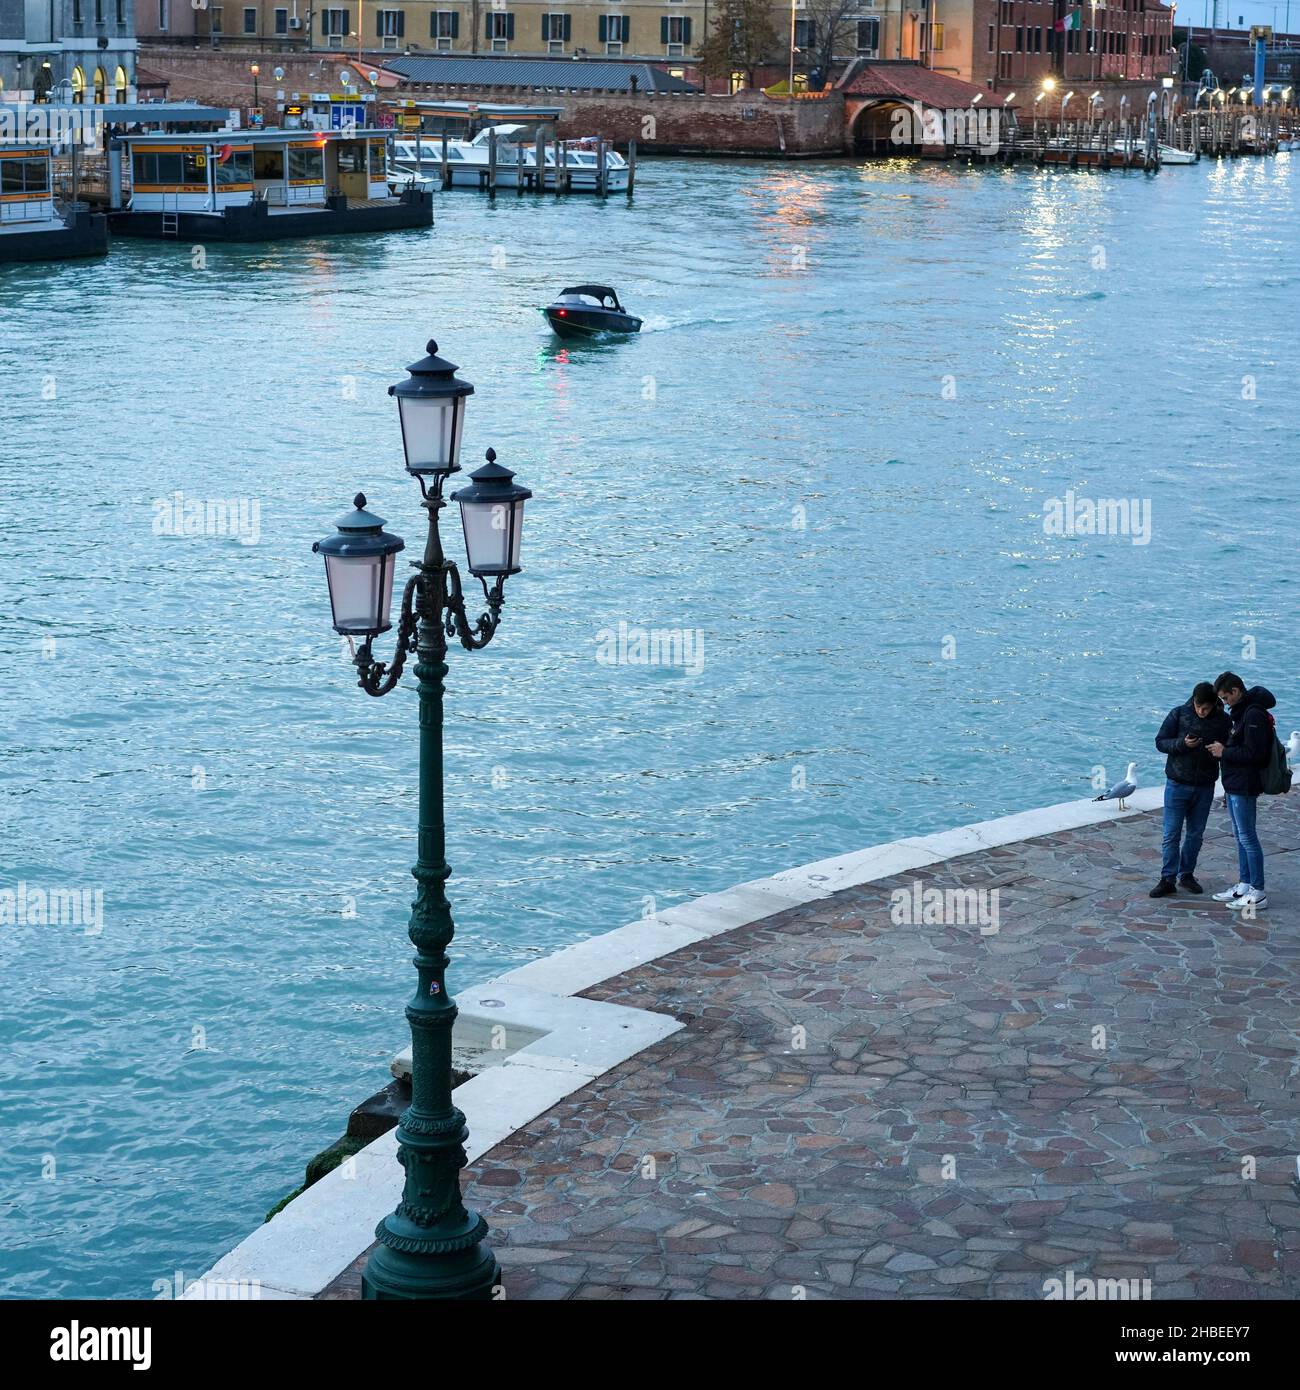 Two young men at a lamppost opposite the Piazzale Roma vaporetto water bus stop on the Grand Canal in Venice look at their smartphones. Stock Photo